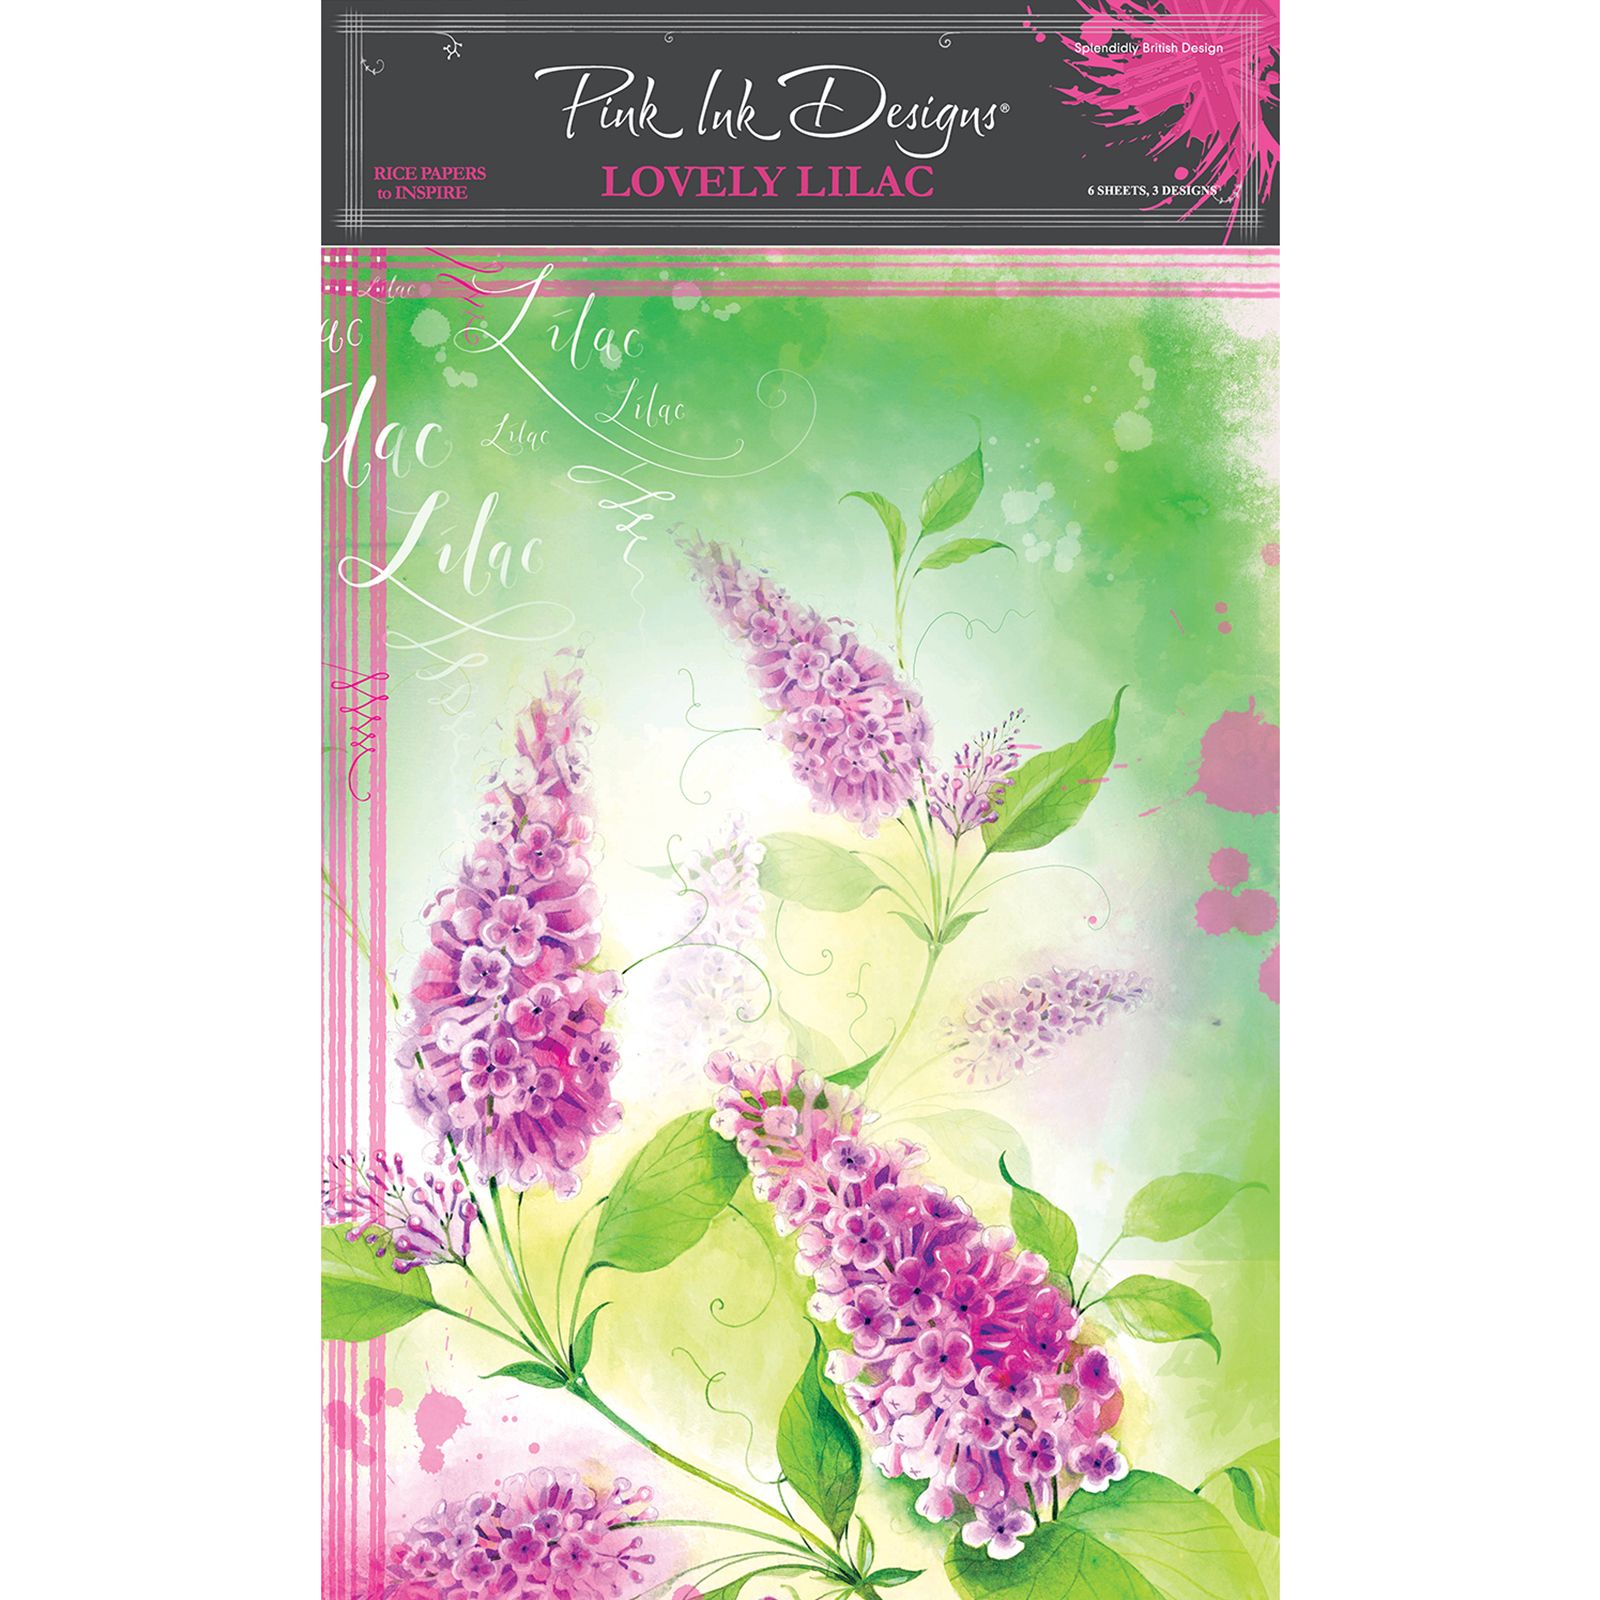 Pink Ink Designs • Rice paper Lovely lilac